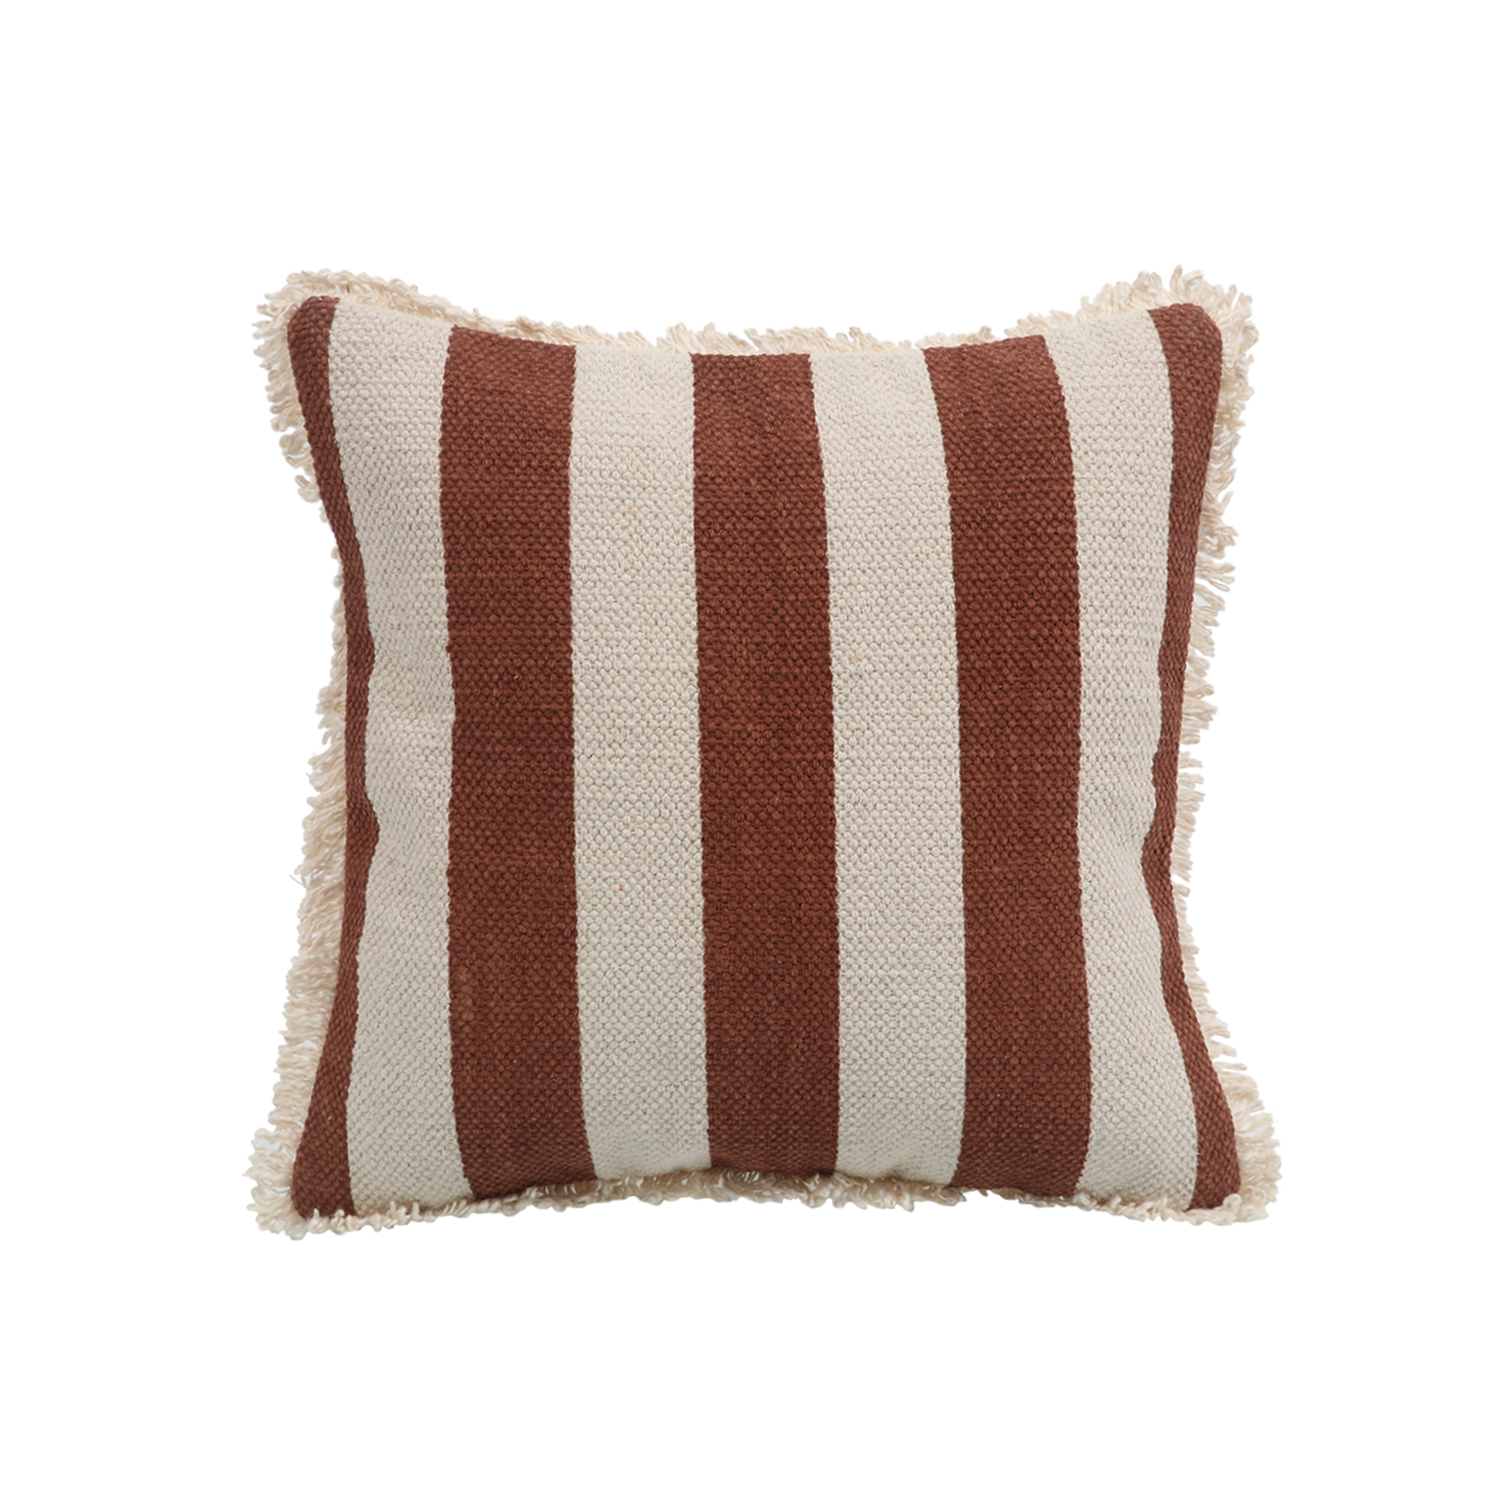 Printed Stripe Dark Brown Cushions Covers with fringes 16X16 Inch